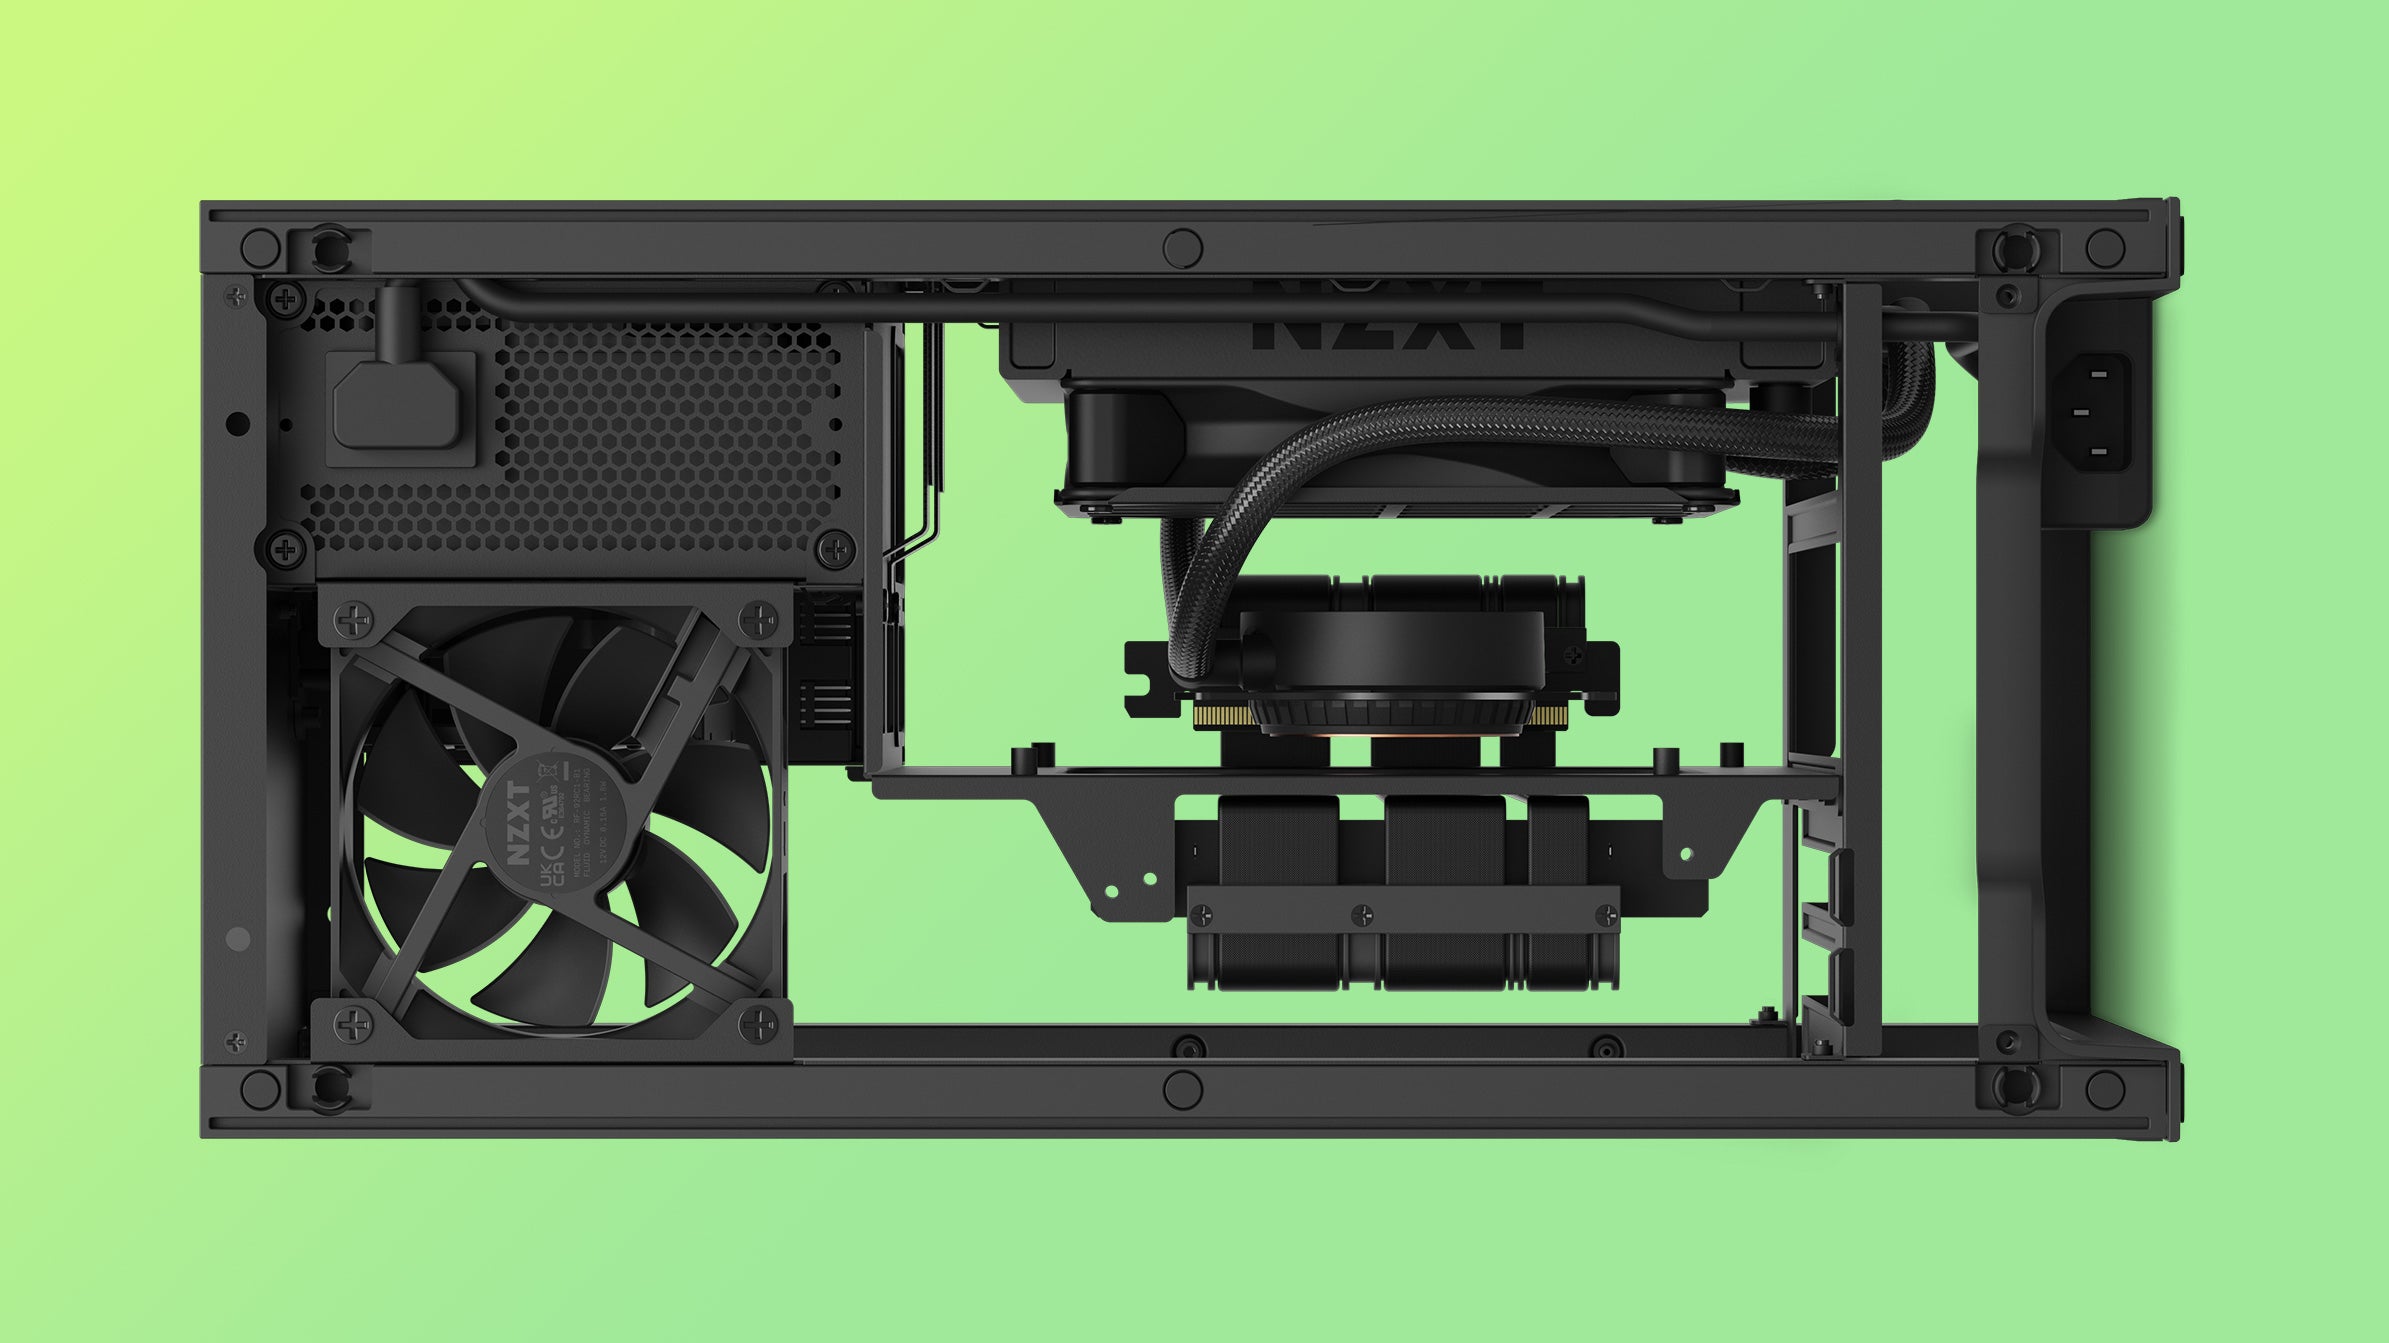 the nzxt h1 v2, with its internal components shown